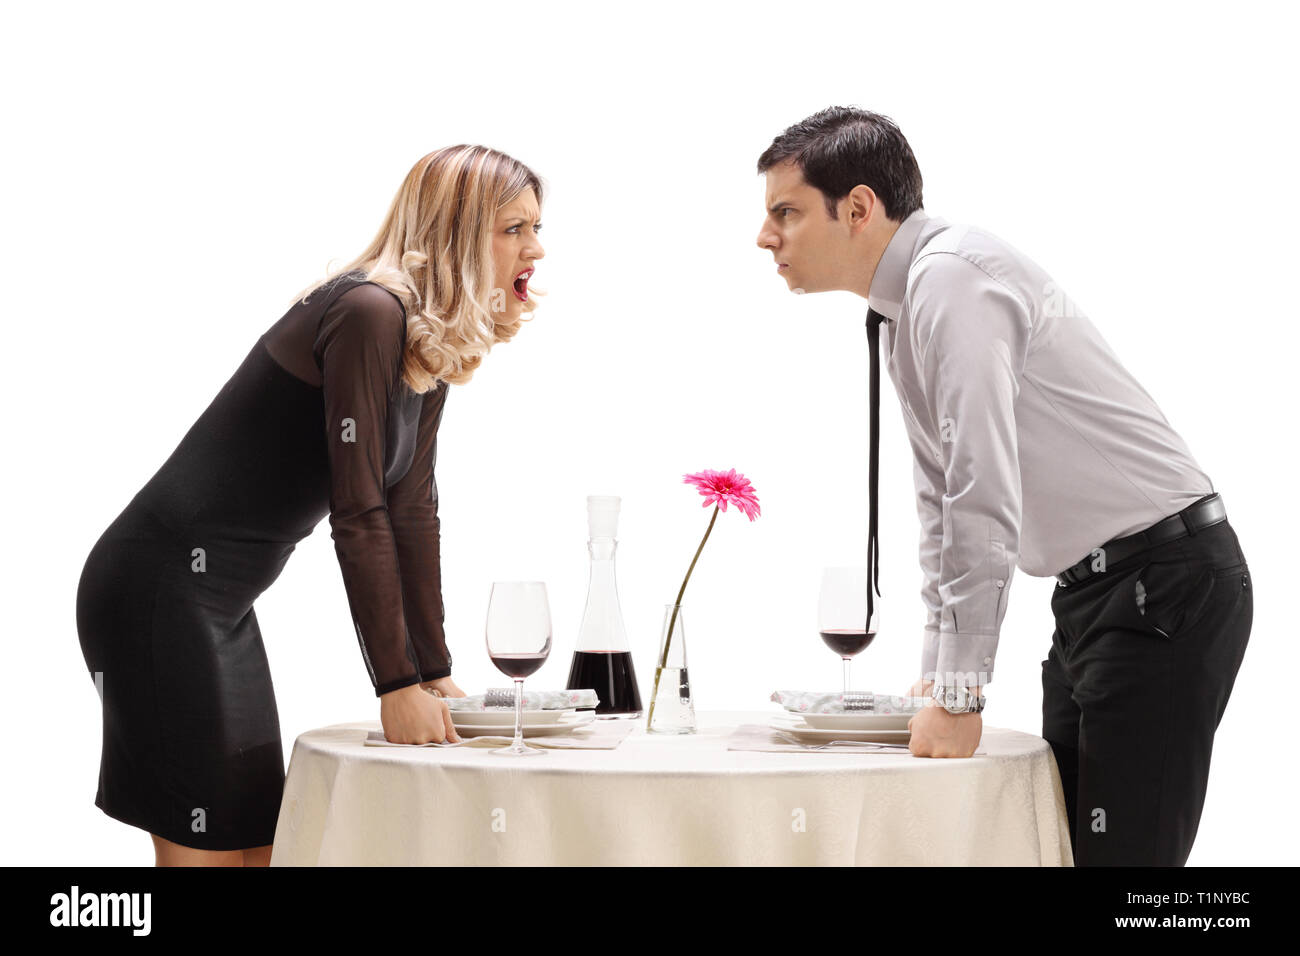 Young man and woman having an argument at a restaurant table isolated on white background Stock Photo